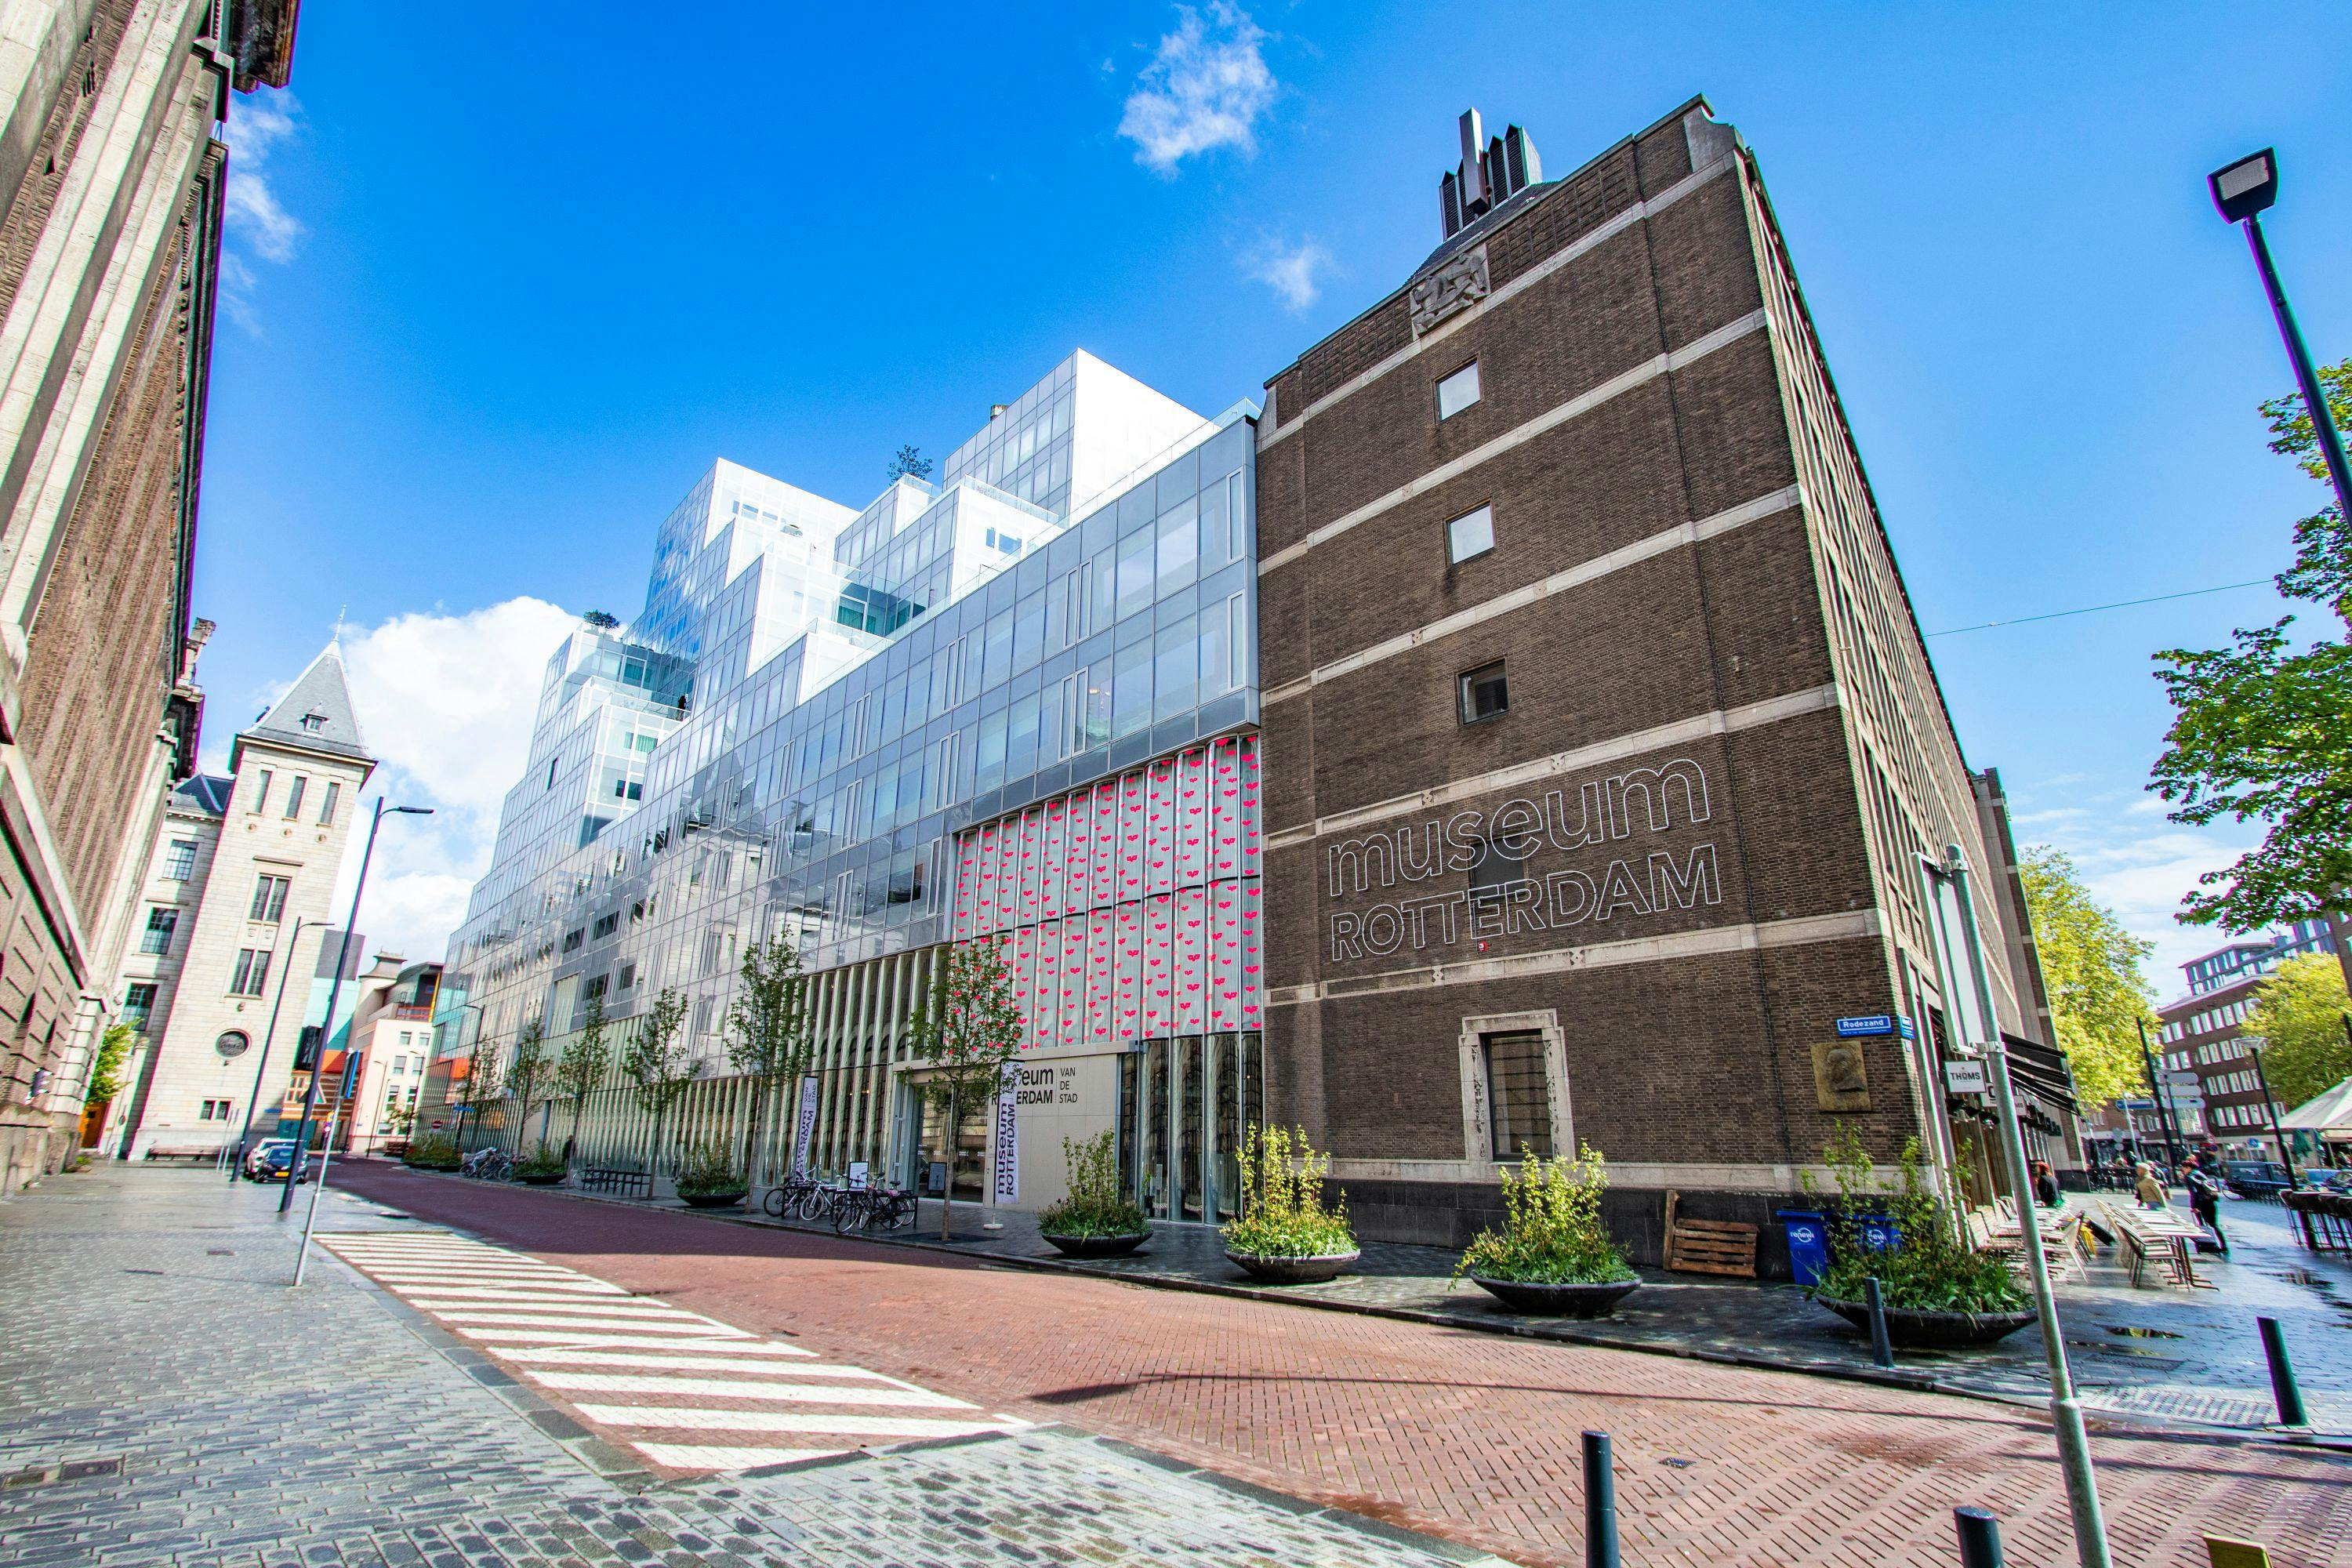 Discover Rotterdam in 90 minutes with a local